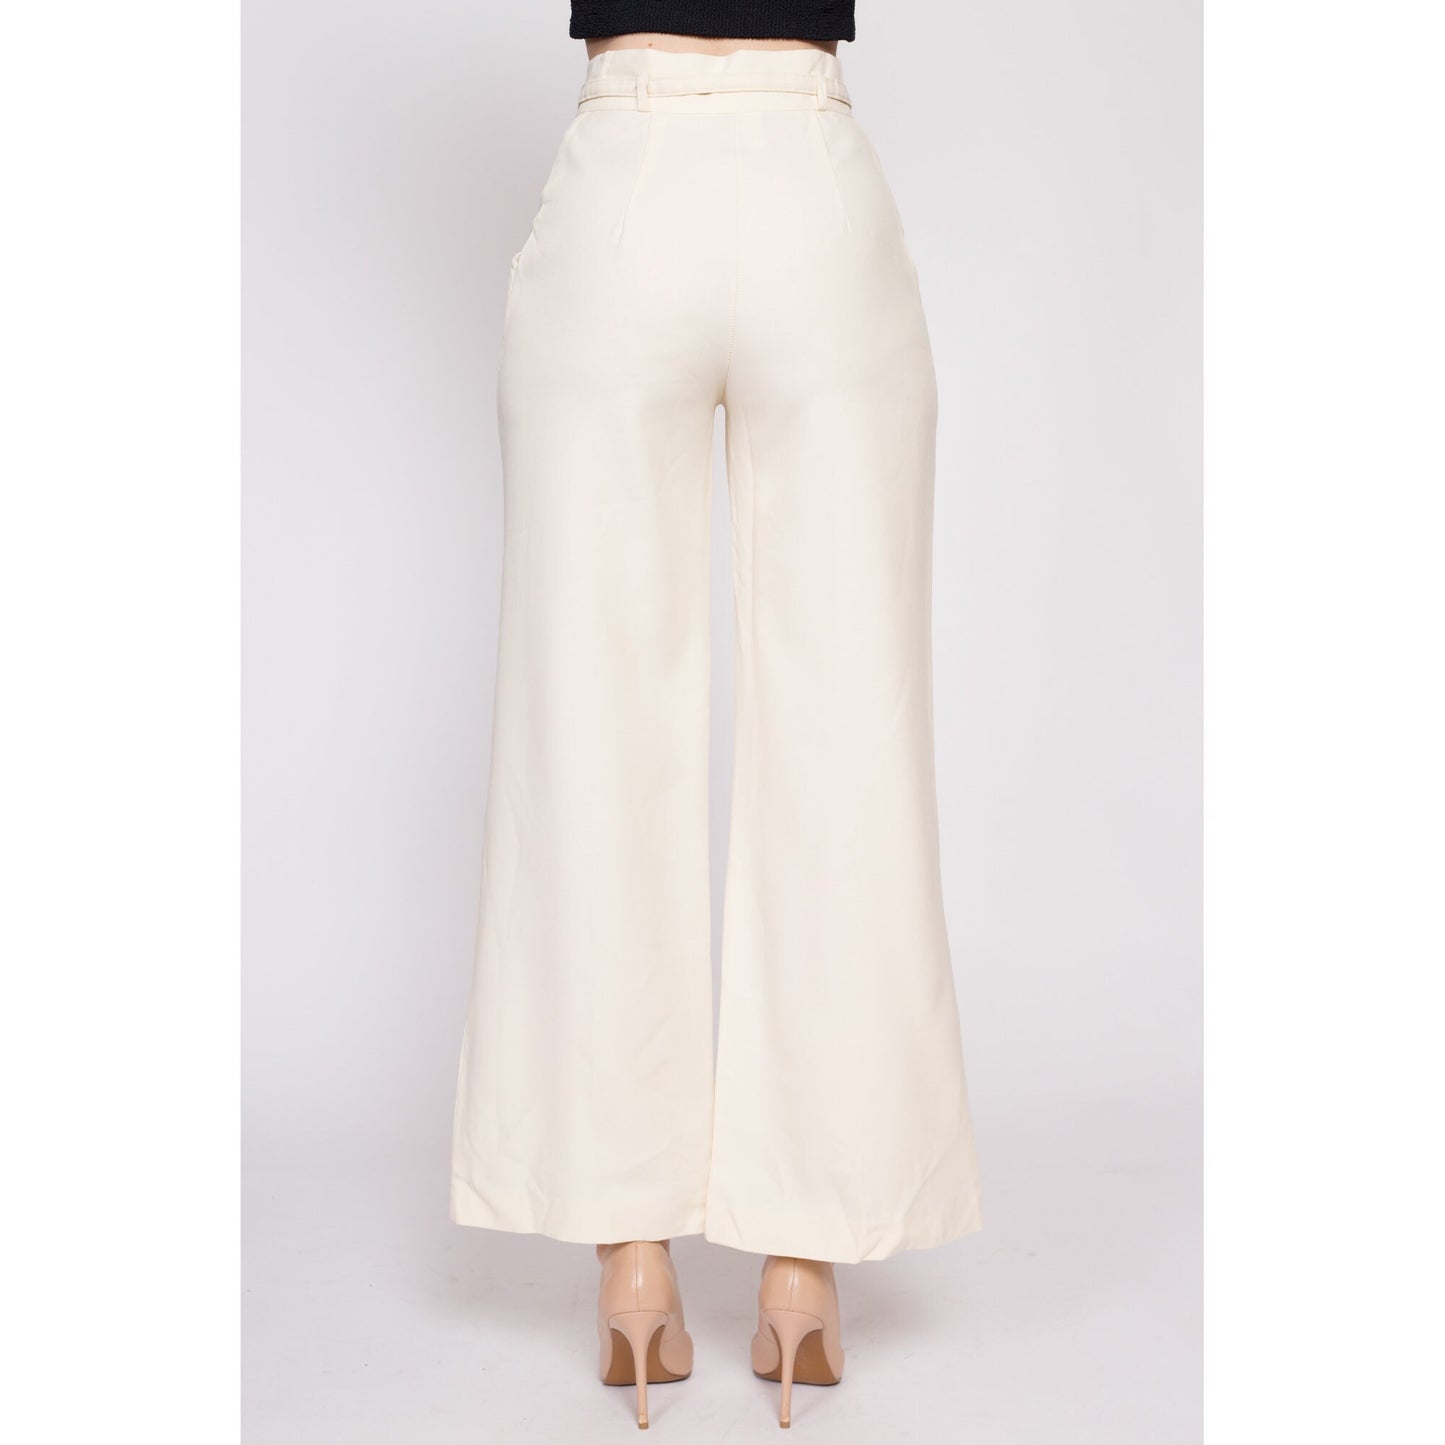 70s Ivory Belted Flares - Small, 26" | Vintage High Waisted Retro Polyester Flared Leg Trousers